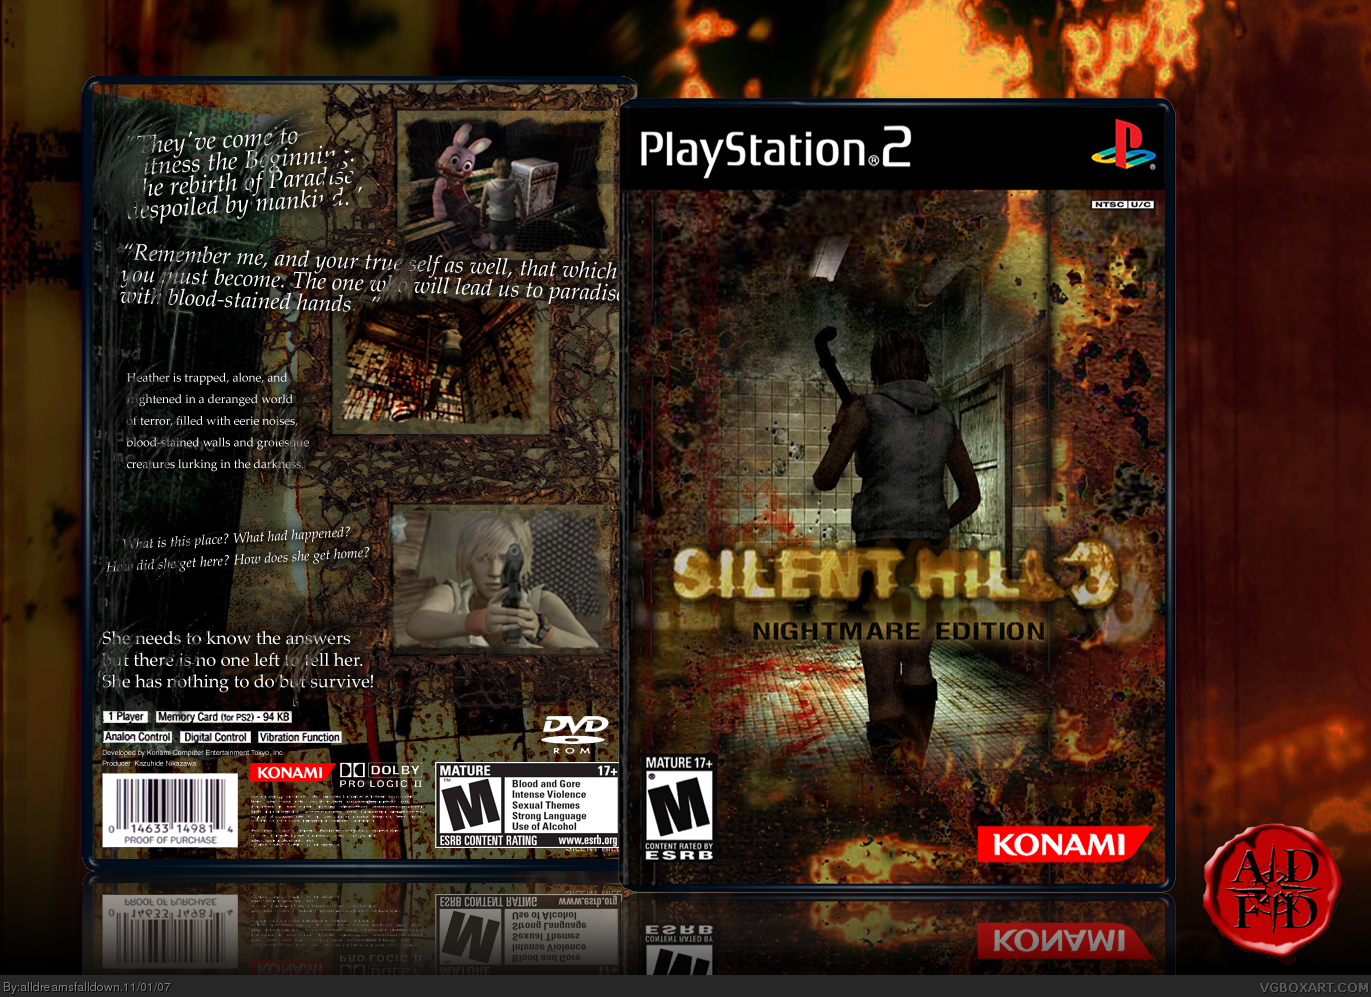 Silent Hill 3: Nightmare Edition box cover